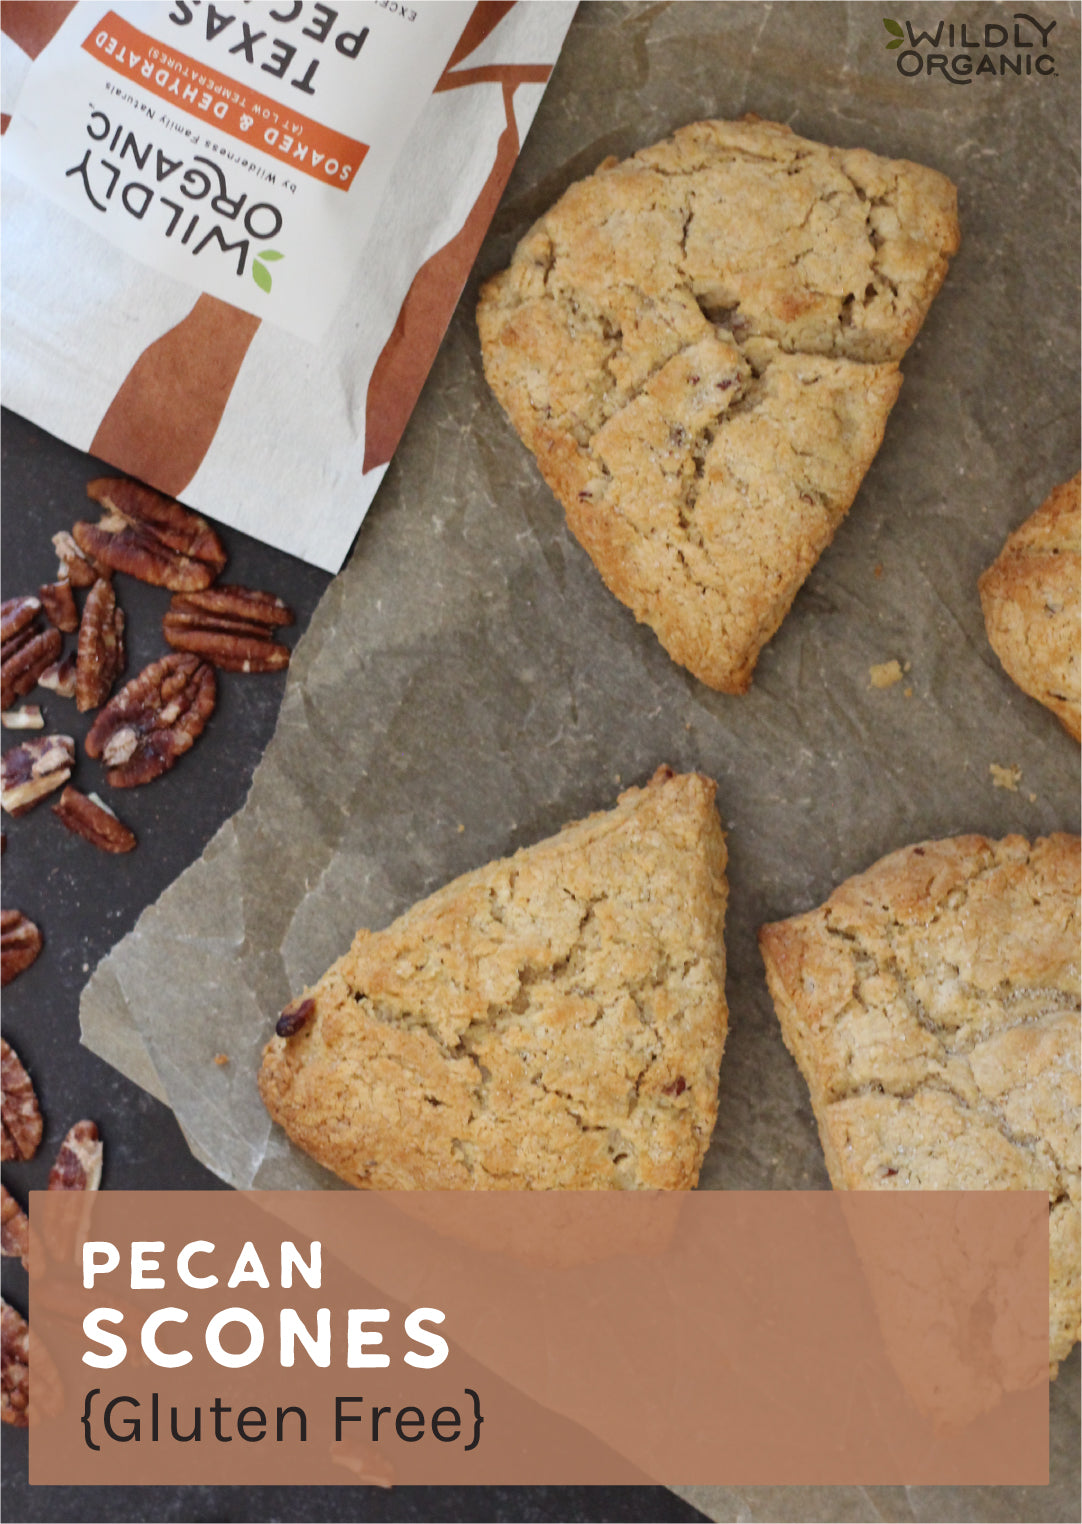 pecan scones on a tabletop with Wildly Organic packaging in the background